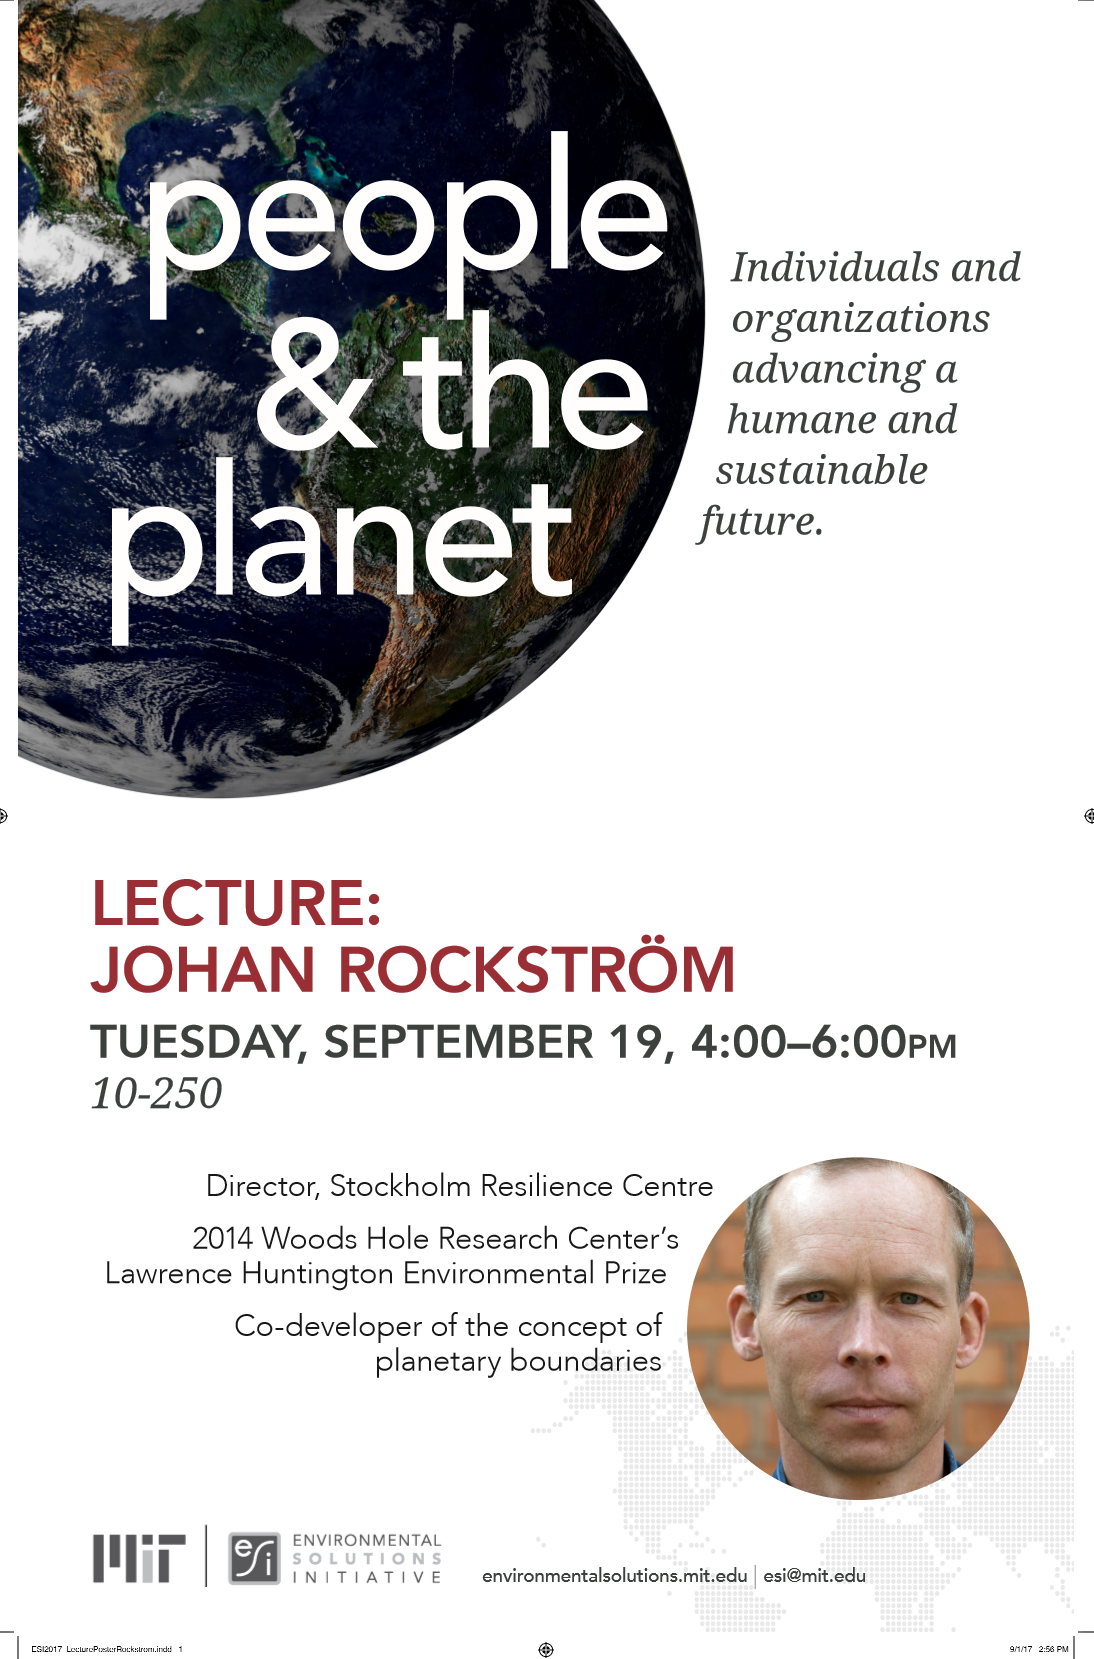 People and the Planet Lecture: Johan Rockstrom